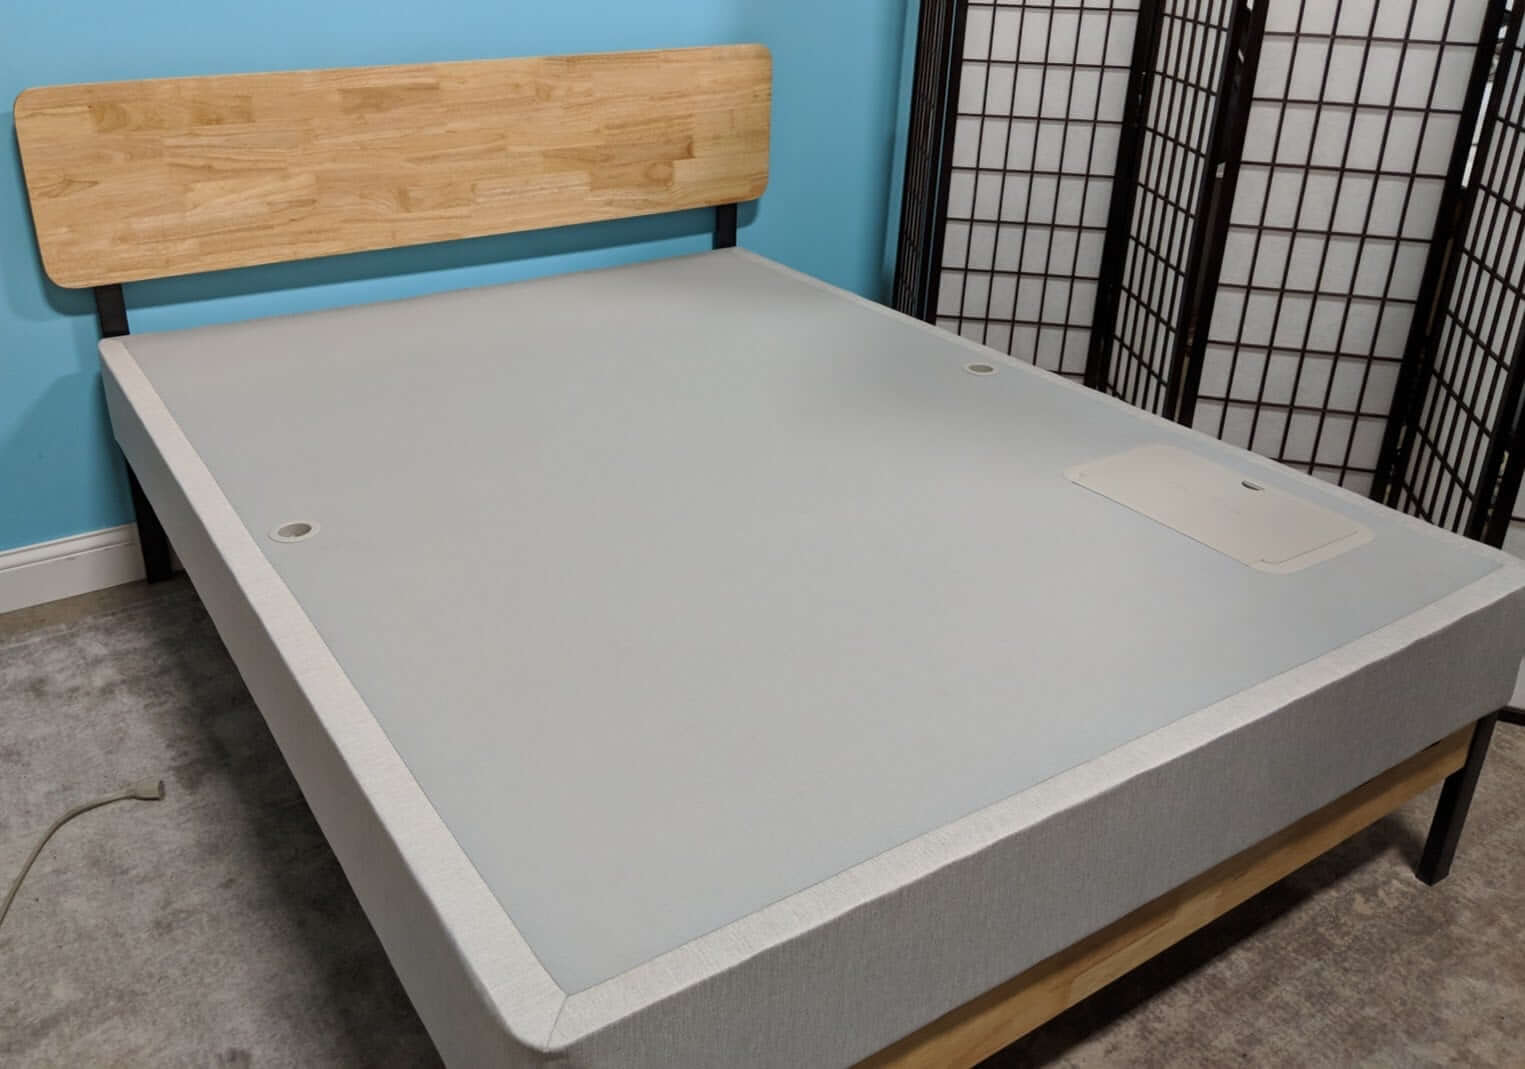 Sleep Number C2 Mattress Review, Sleep Number C2 Bed King Size